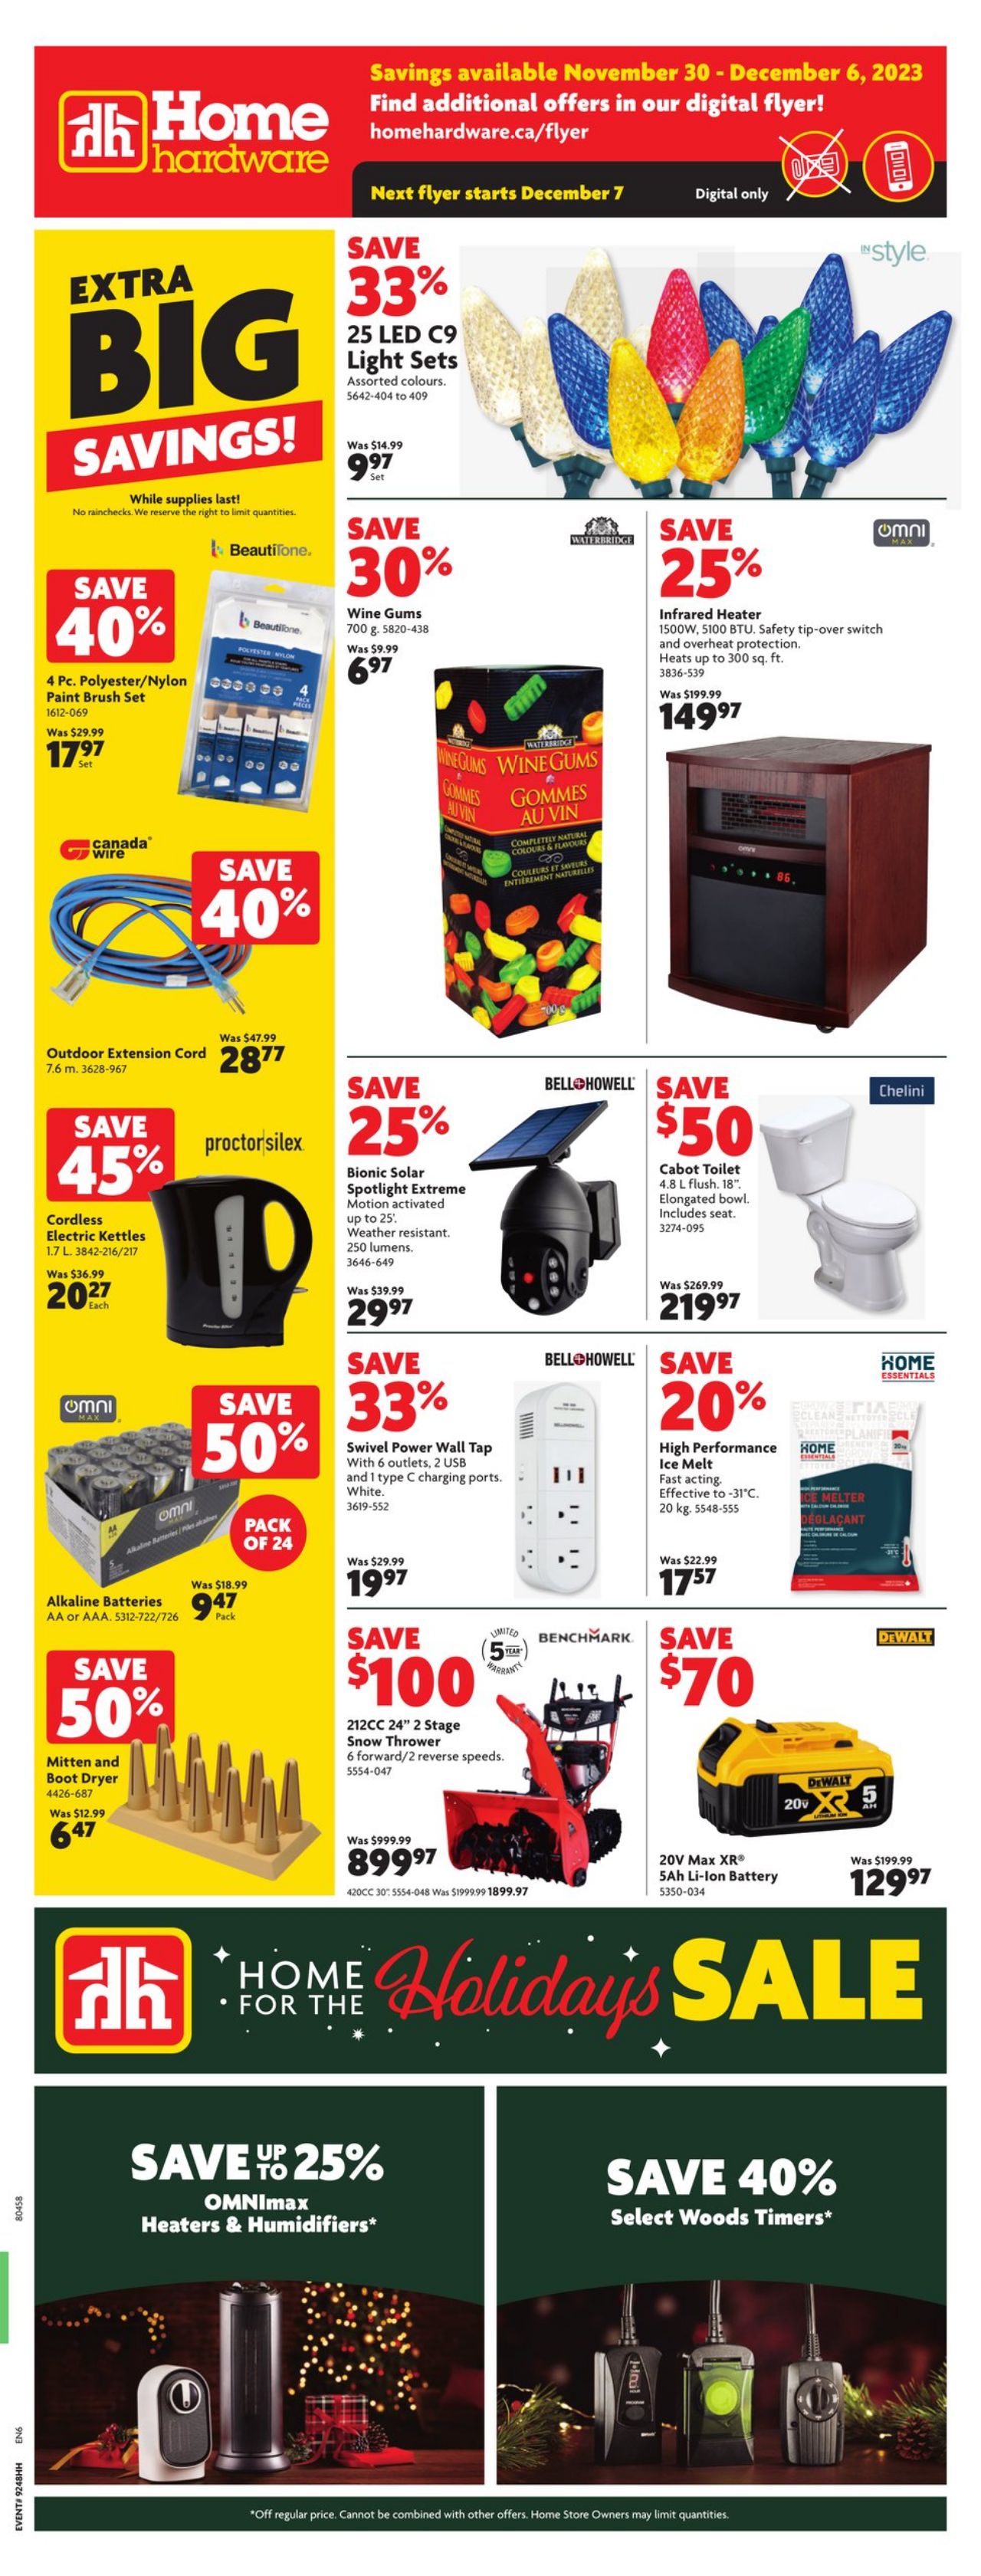 Home Hardware Promotional Flyer Christmas Valid from 30.11 to 06.12